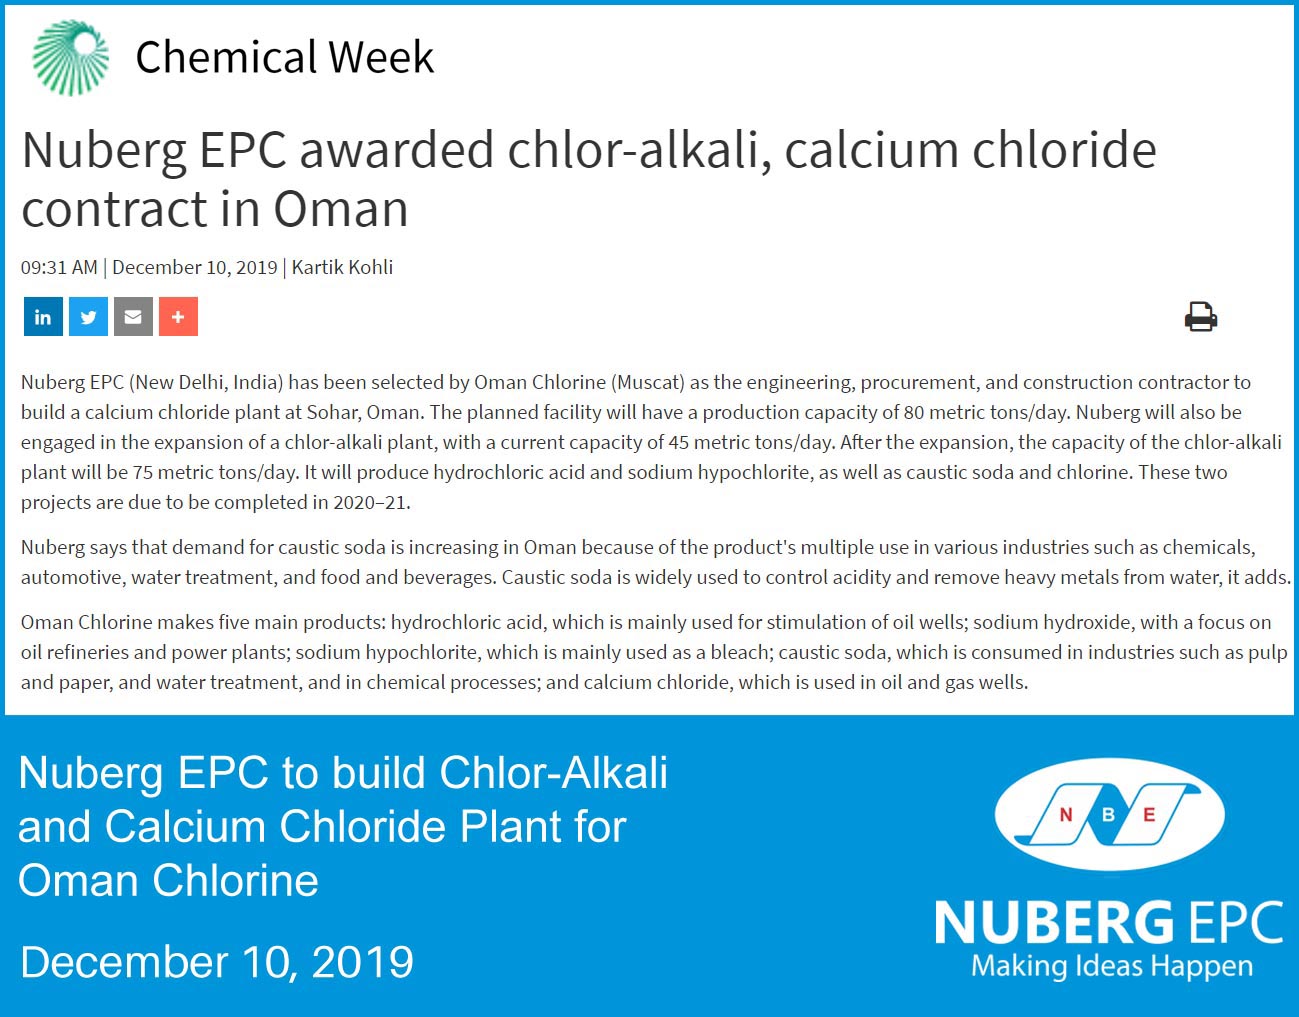 Chemical Week - Nuberg EPC Wins Caustic Soda and Calcium Chloride Plant EPC Contract for Oman Chlorine